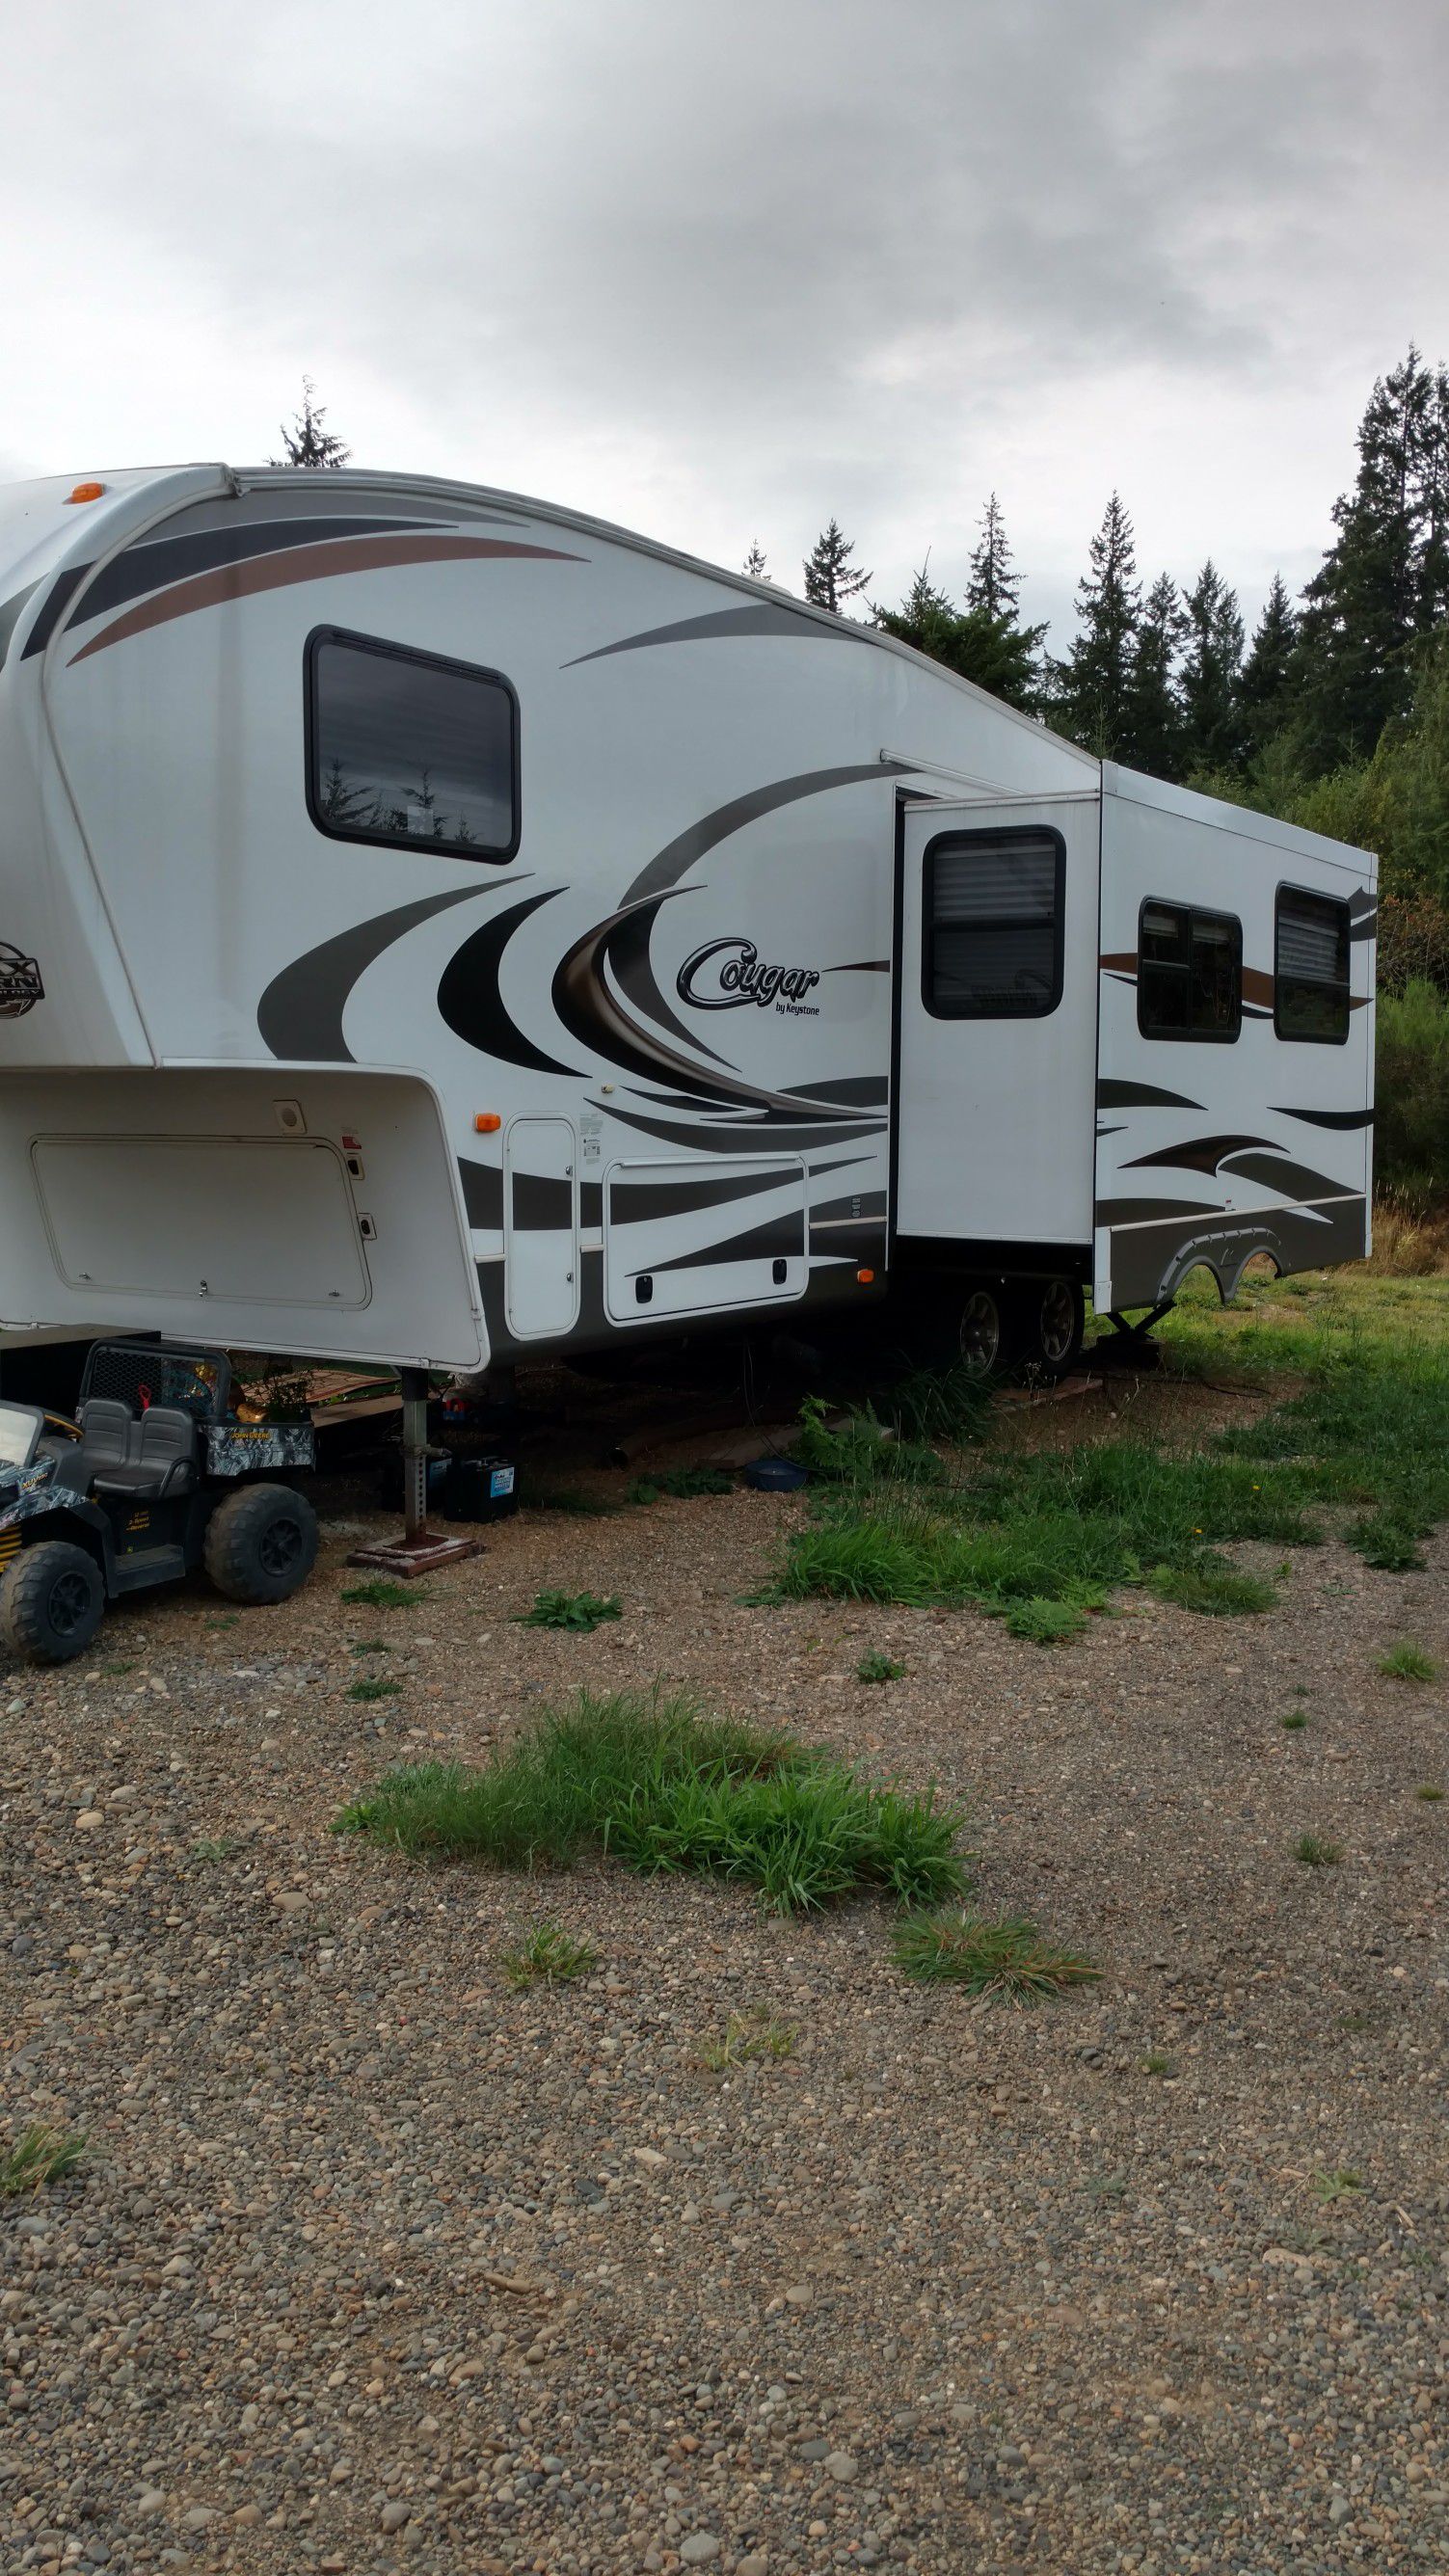 2013 31ft fifth wheel, one owner, like new